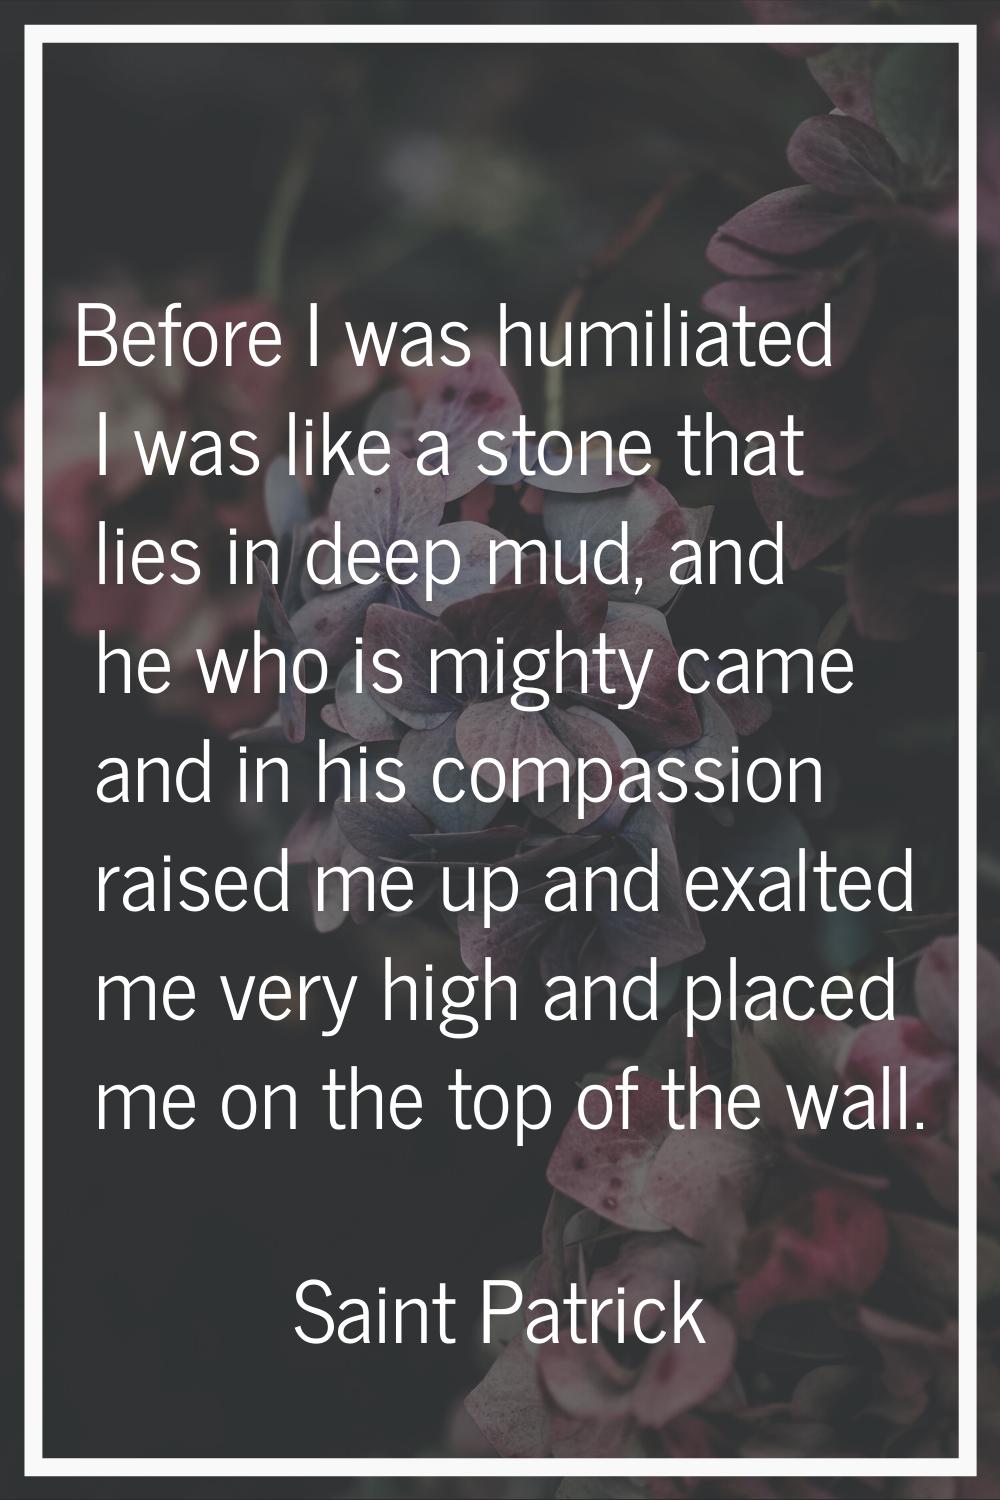 Before I was humiliated I was like a stone that lies in deep mud, and he who is mighty came and in 